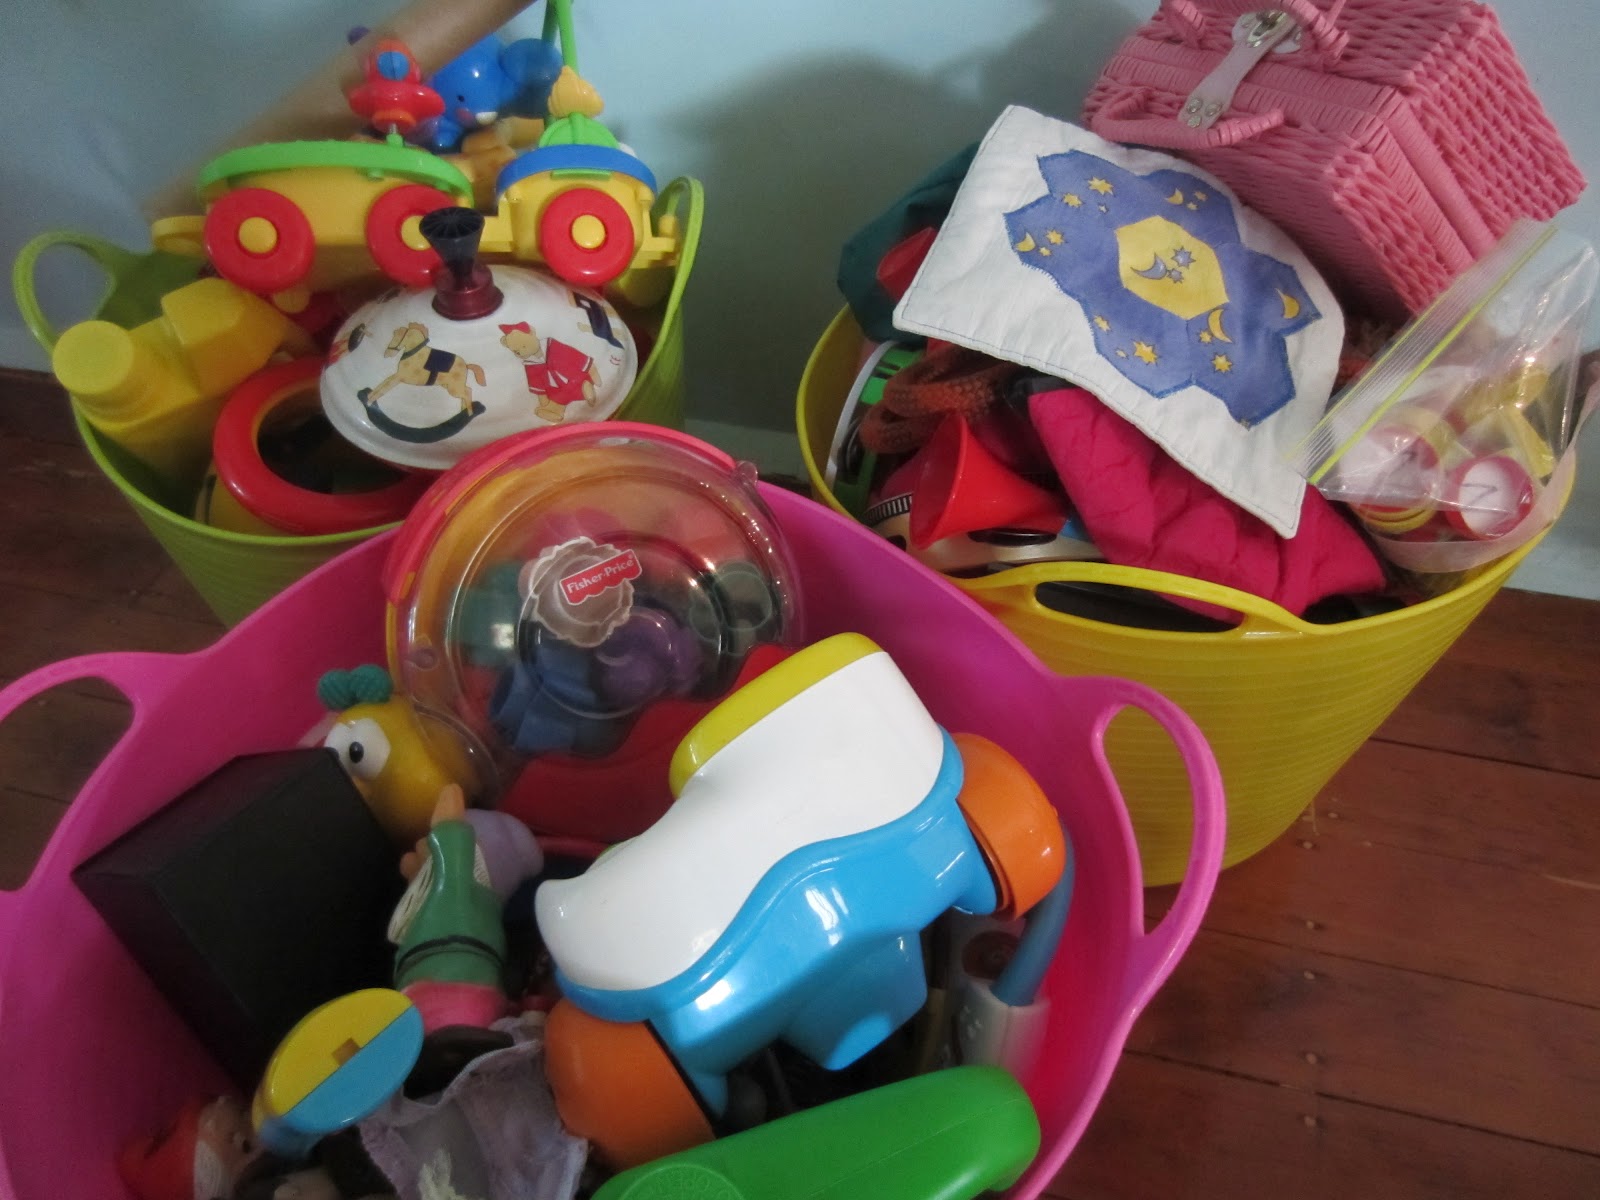 Kids Activities & Tips 4 Everyday Give your KIDS NEW TOYS FOR FREE